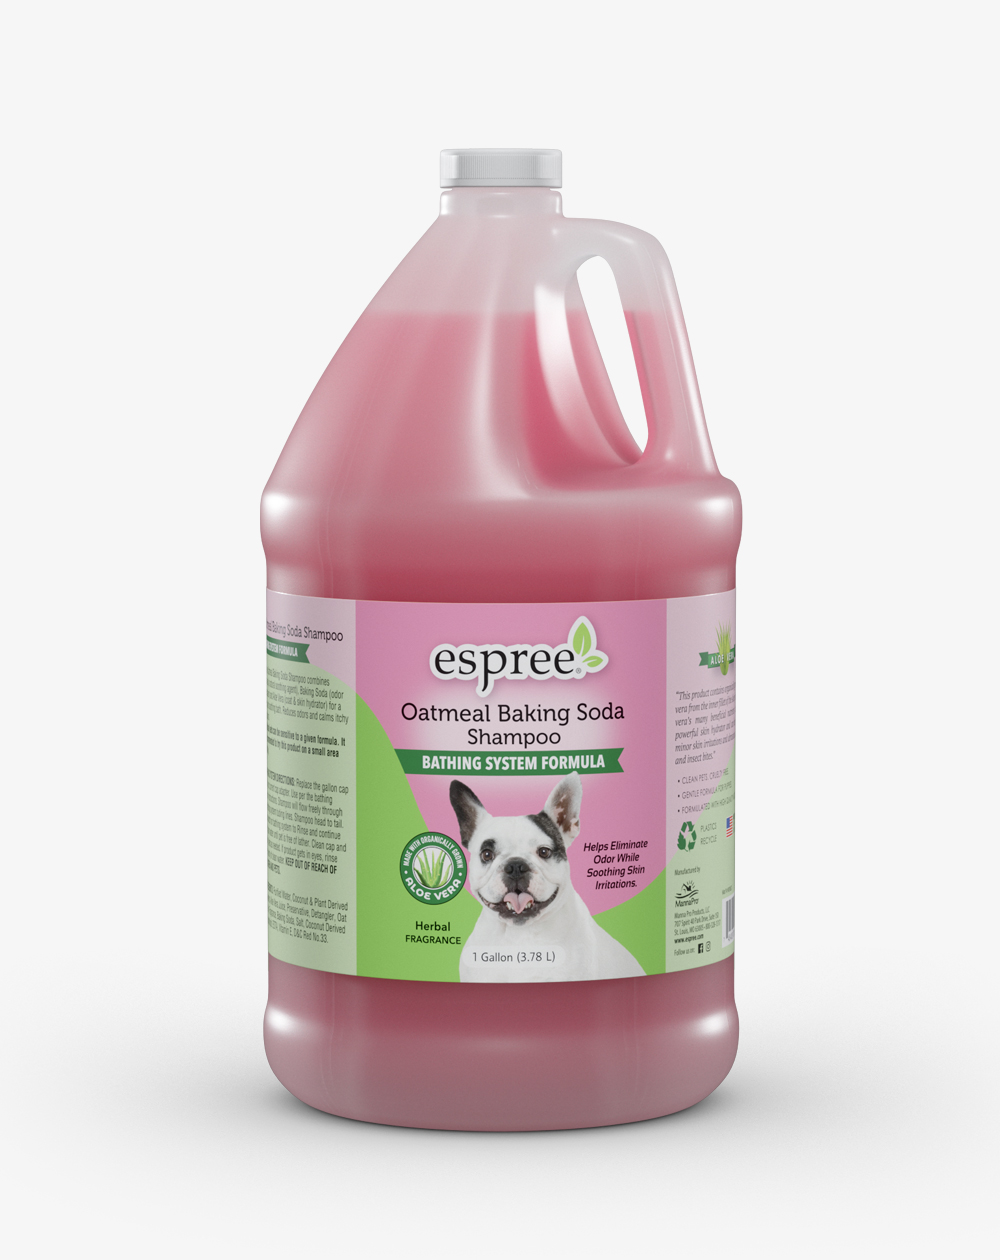 Our dog bathing system shampoo eliminates odors while relieving skin